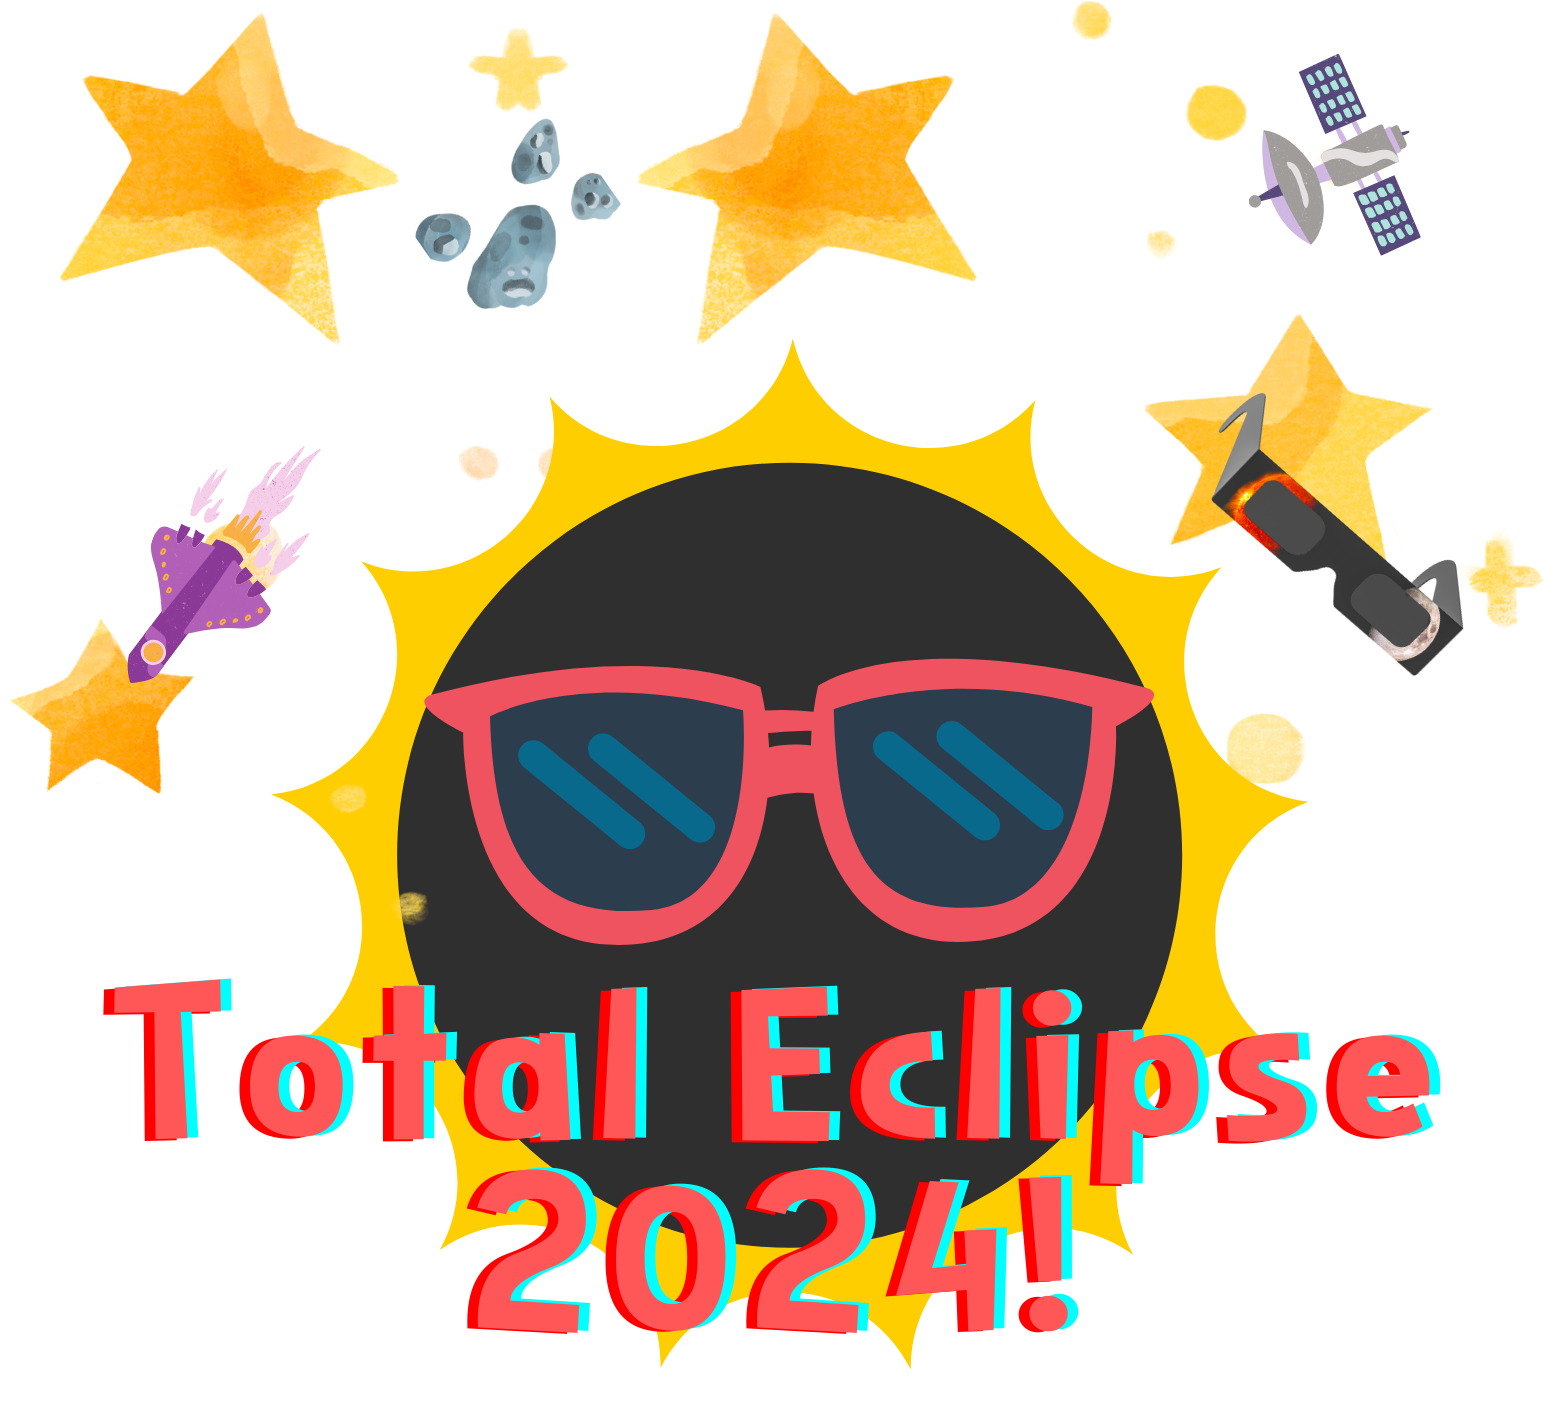 Clipart of a total eclipse with sunglasses on, surrounded by stars, rockets, probes and solar glasses. In the middle are the words "Total Eclipse 2024!"